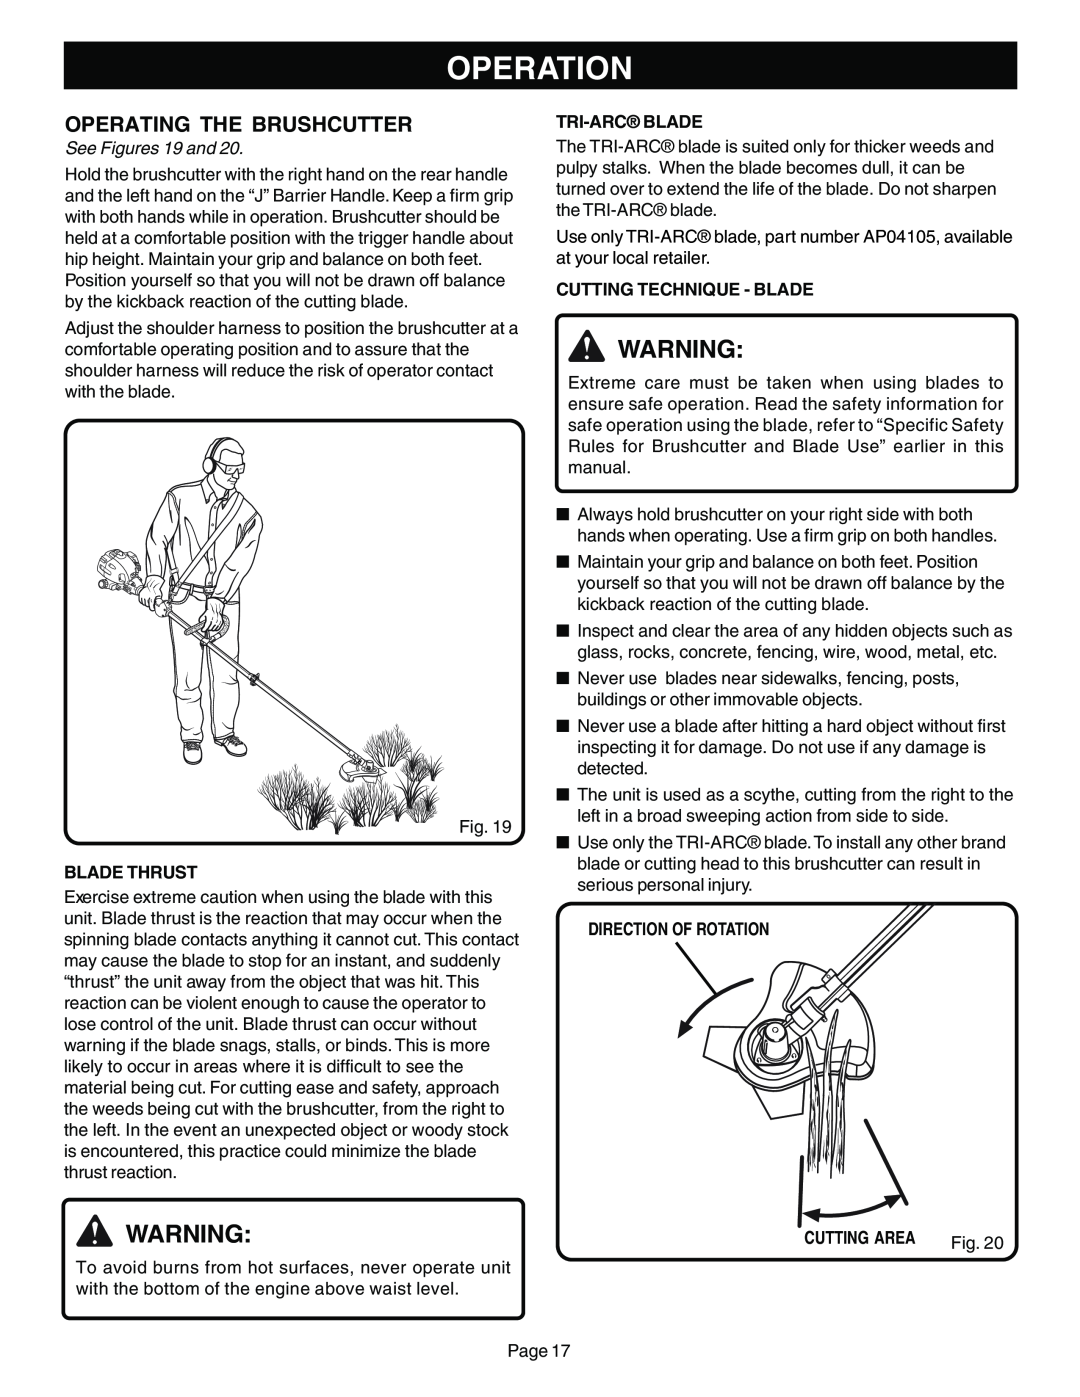 Ryobi Outdoor BC30 ZR30004 manual Operation, See Figures 19 and, Blade Thrust, Tri-Arcblade, Cutting Technique - Blade 